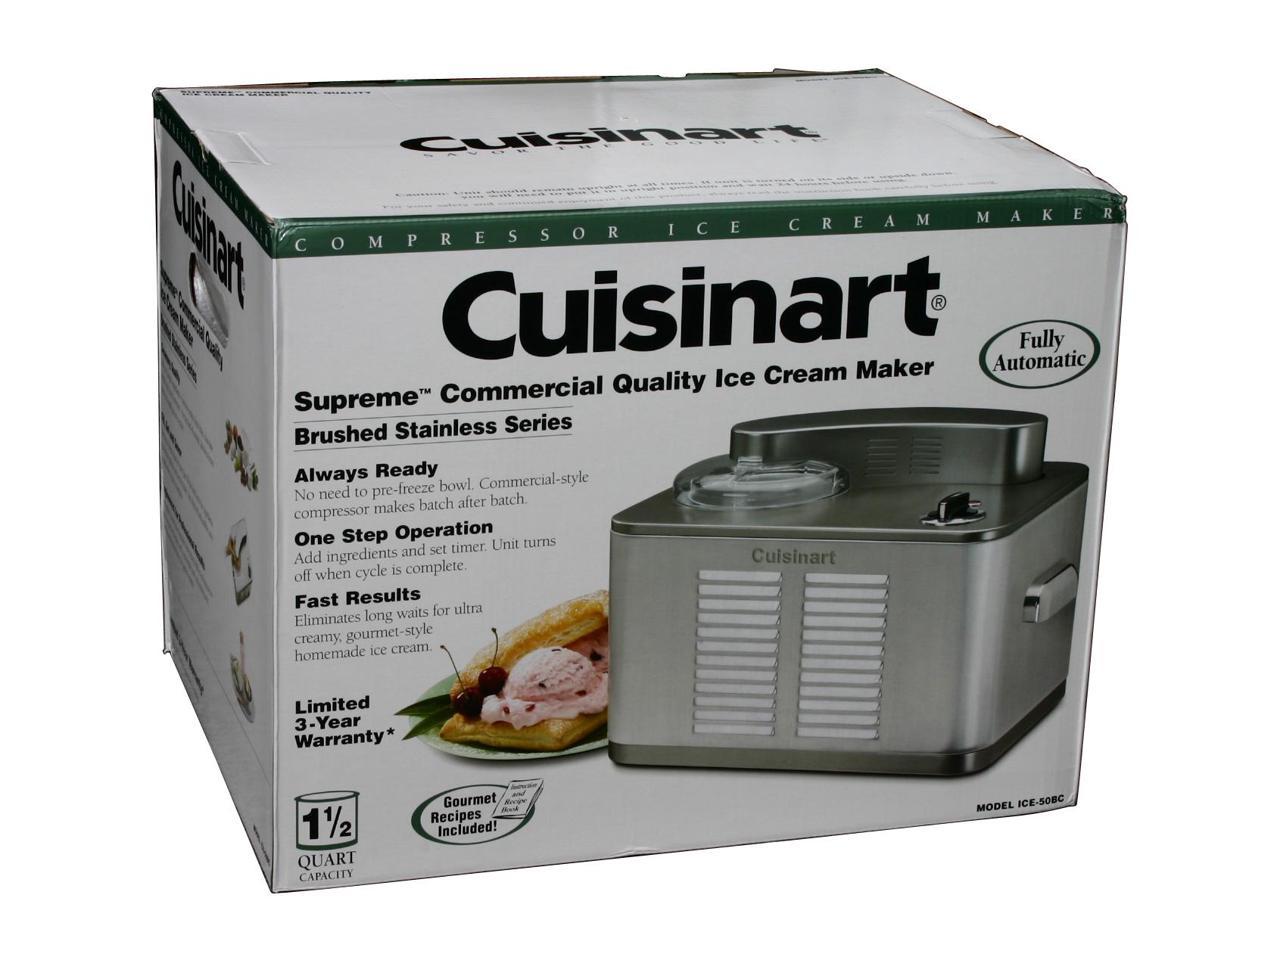 Cuisinart Ice 50bc Supreme Commercial